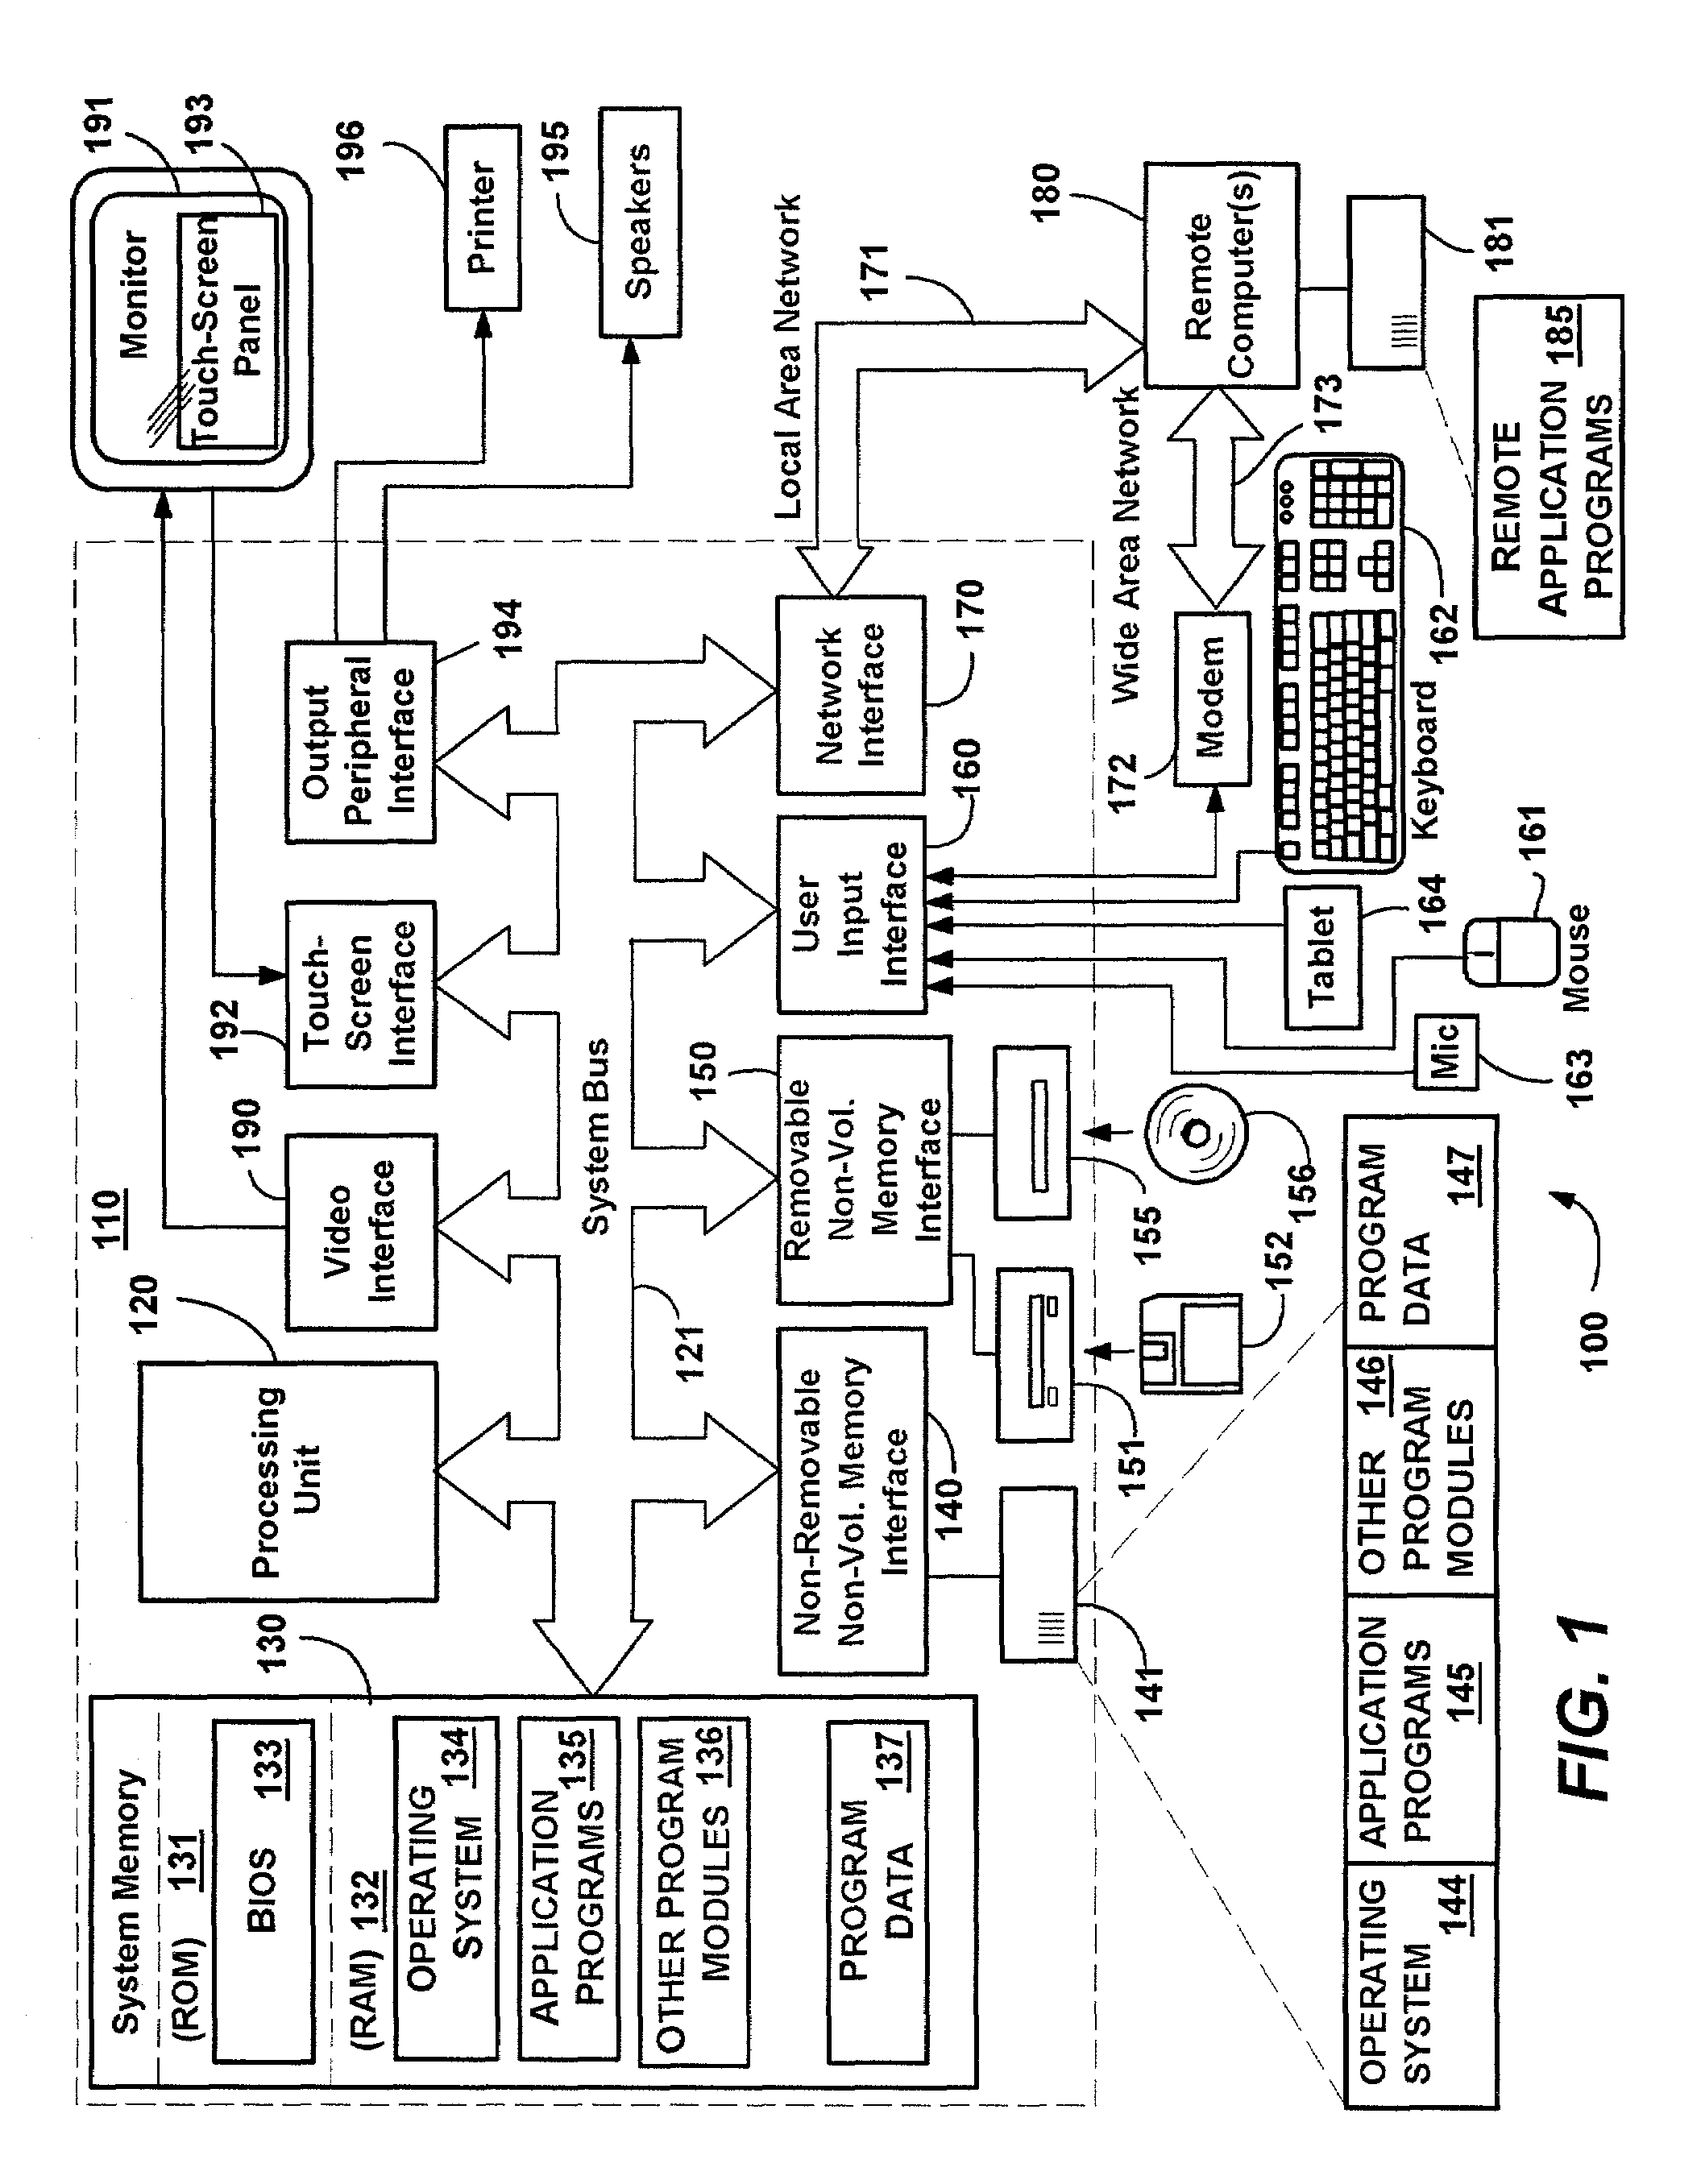 Natural input recognition system and method using a contextual mapping engine and adaptive user bias